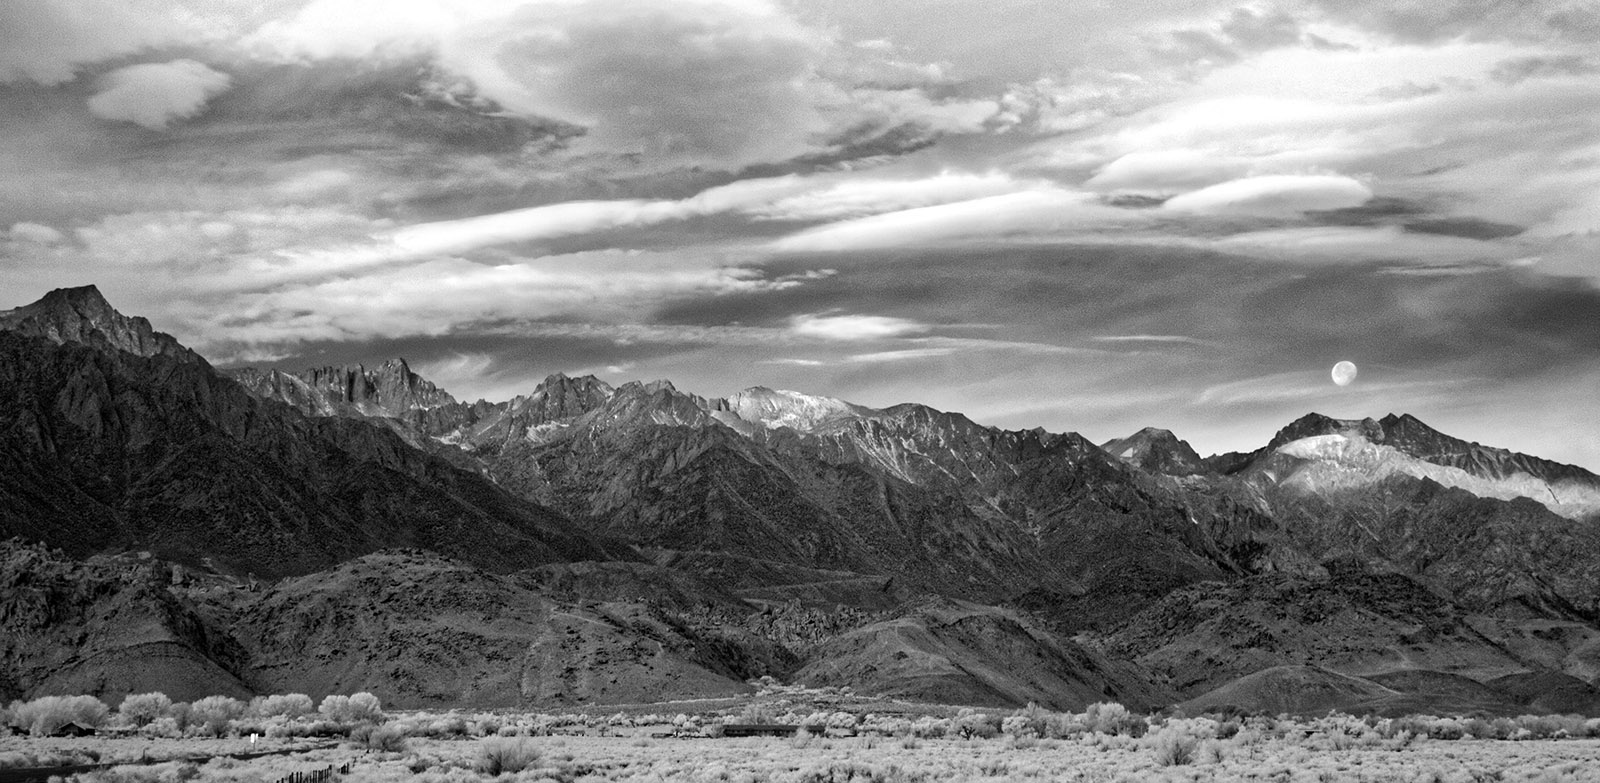 Moonset over Sierra Nevada at Lone Pine, Infrared.